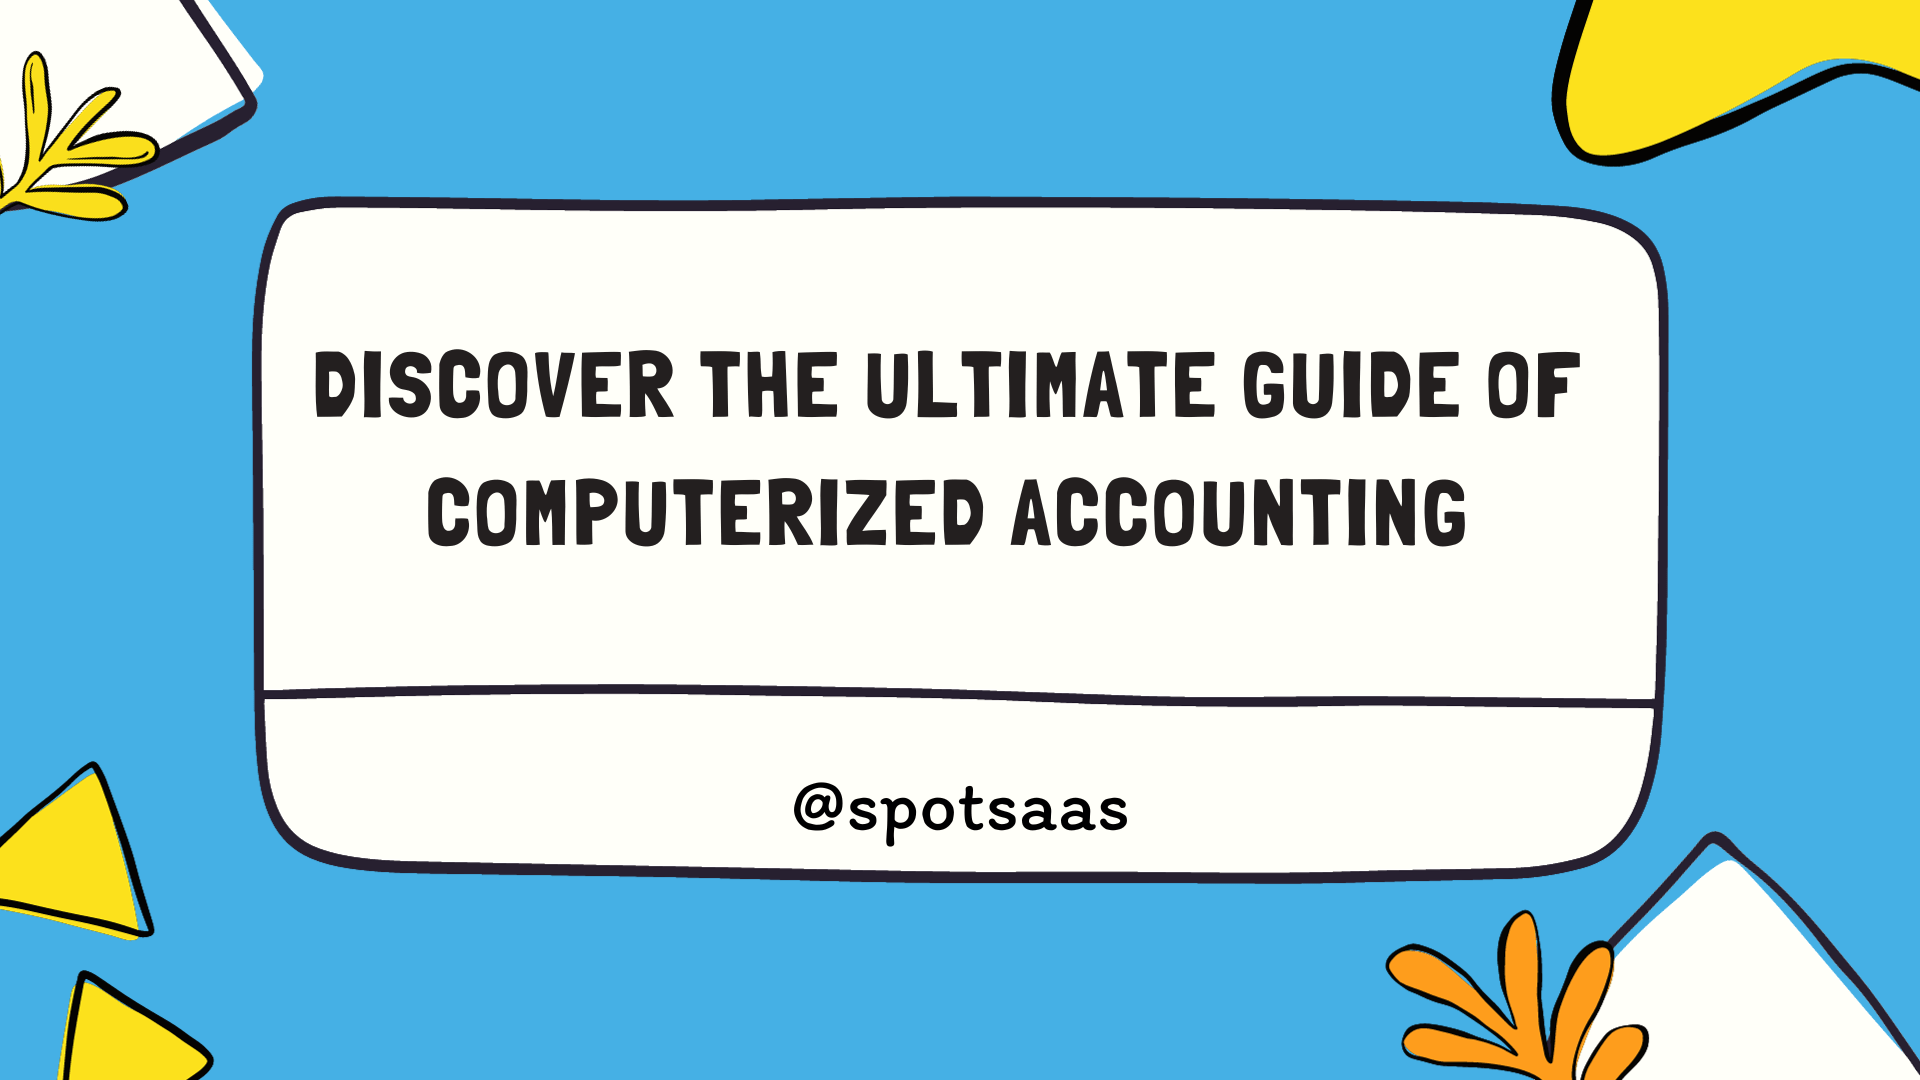 Discover the Ultimate Guide of Computerized Accounting